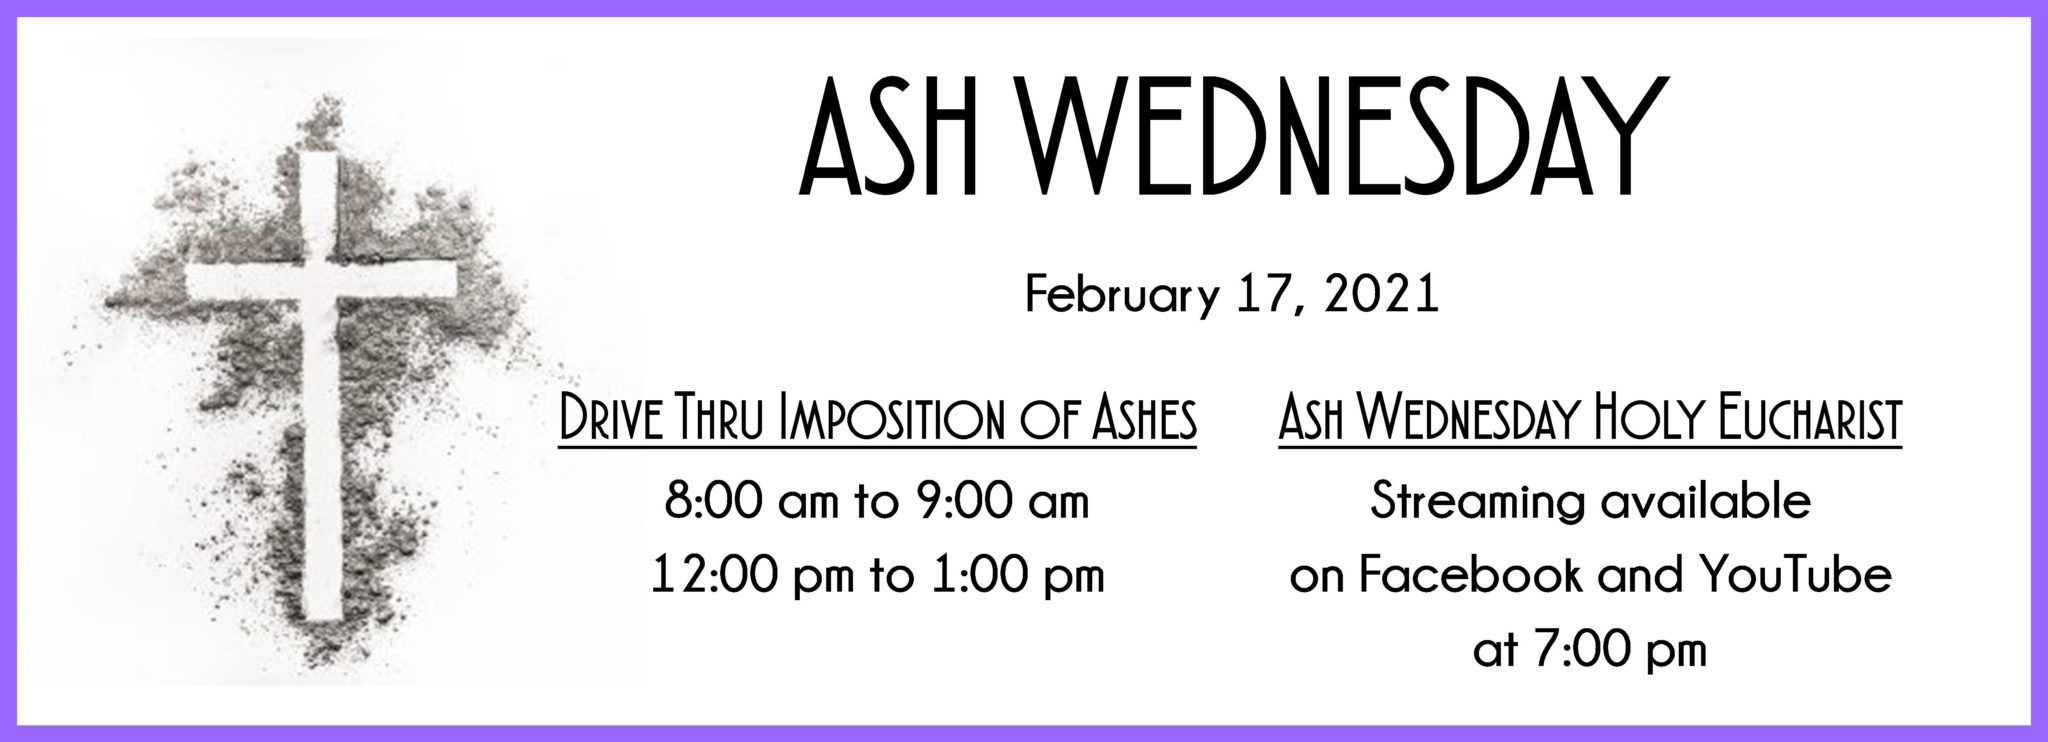 preparing ashes for imposition